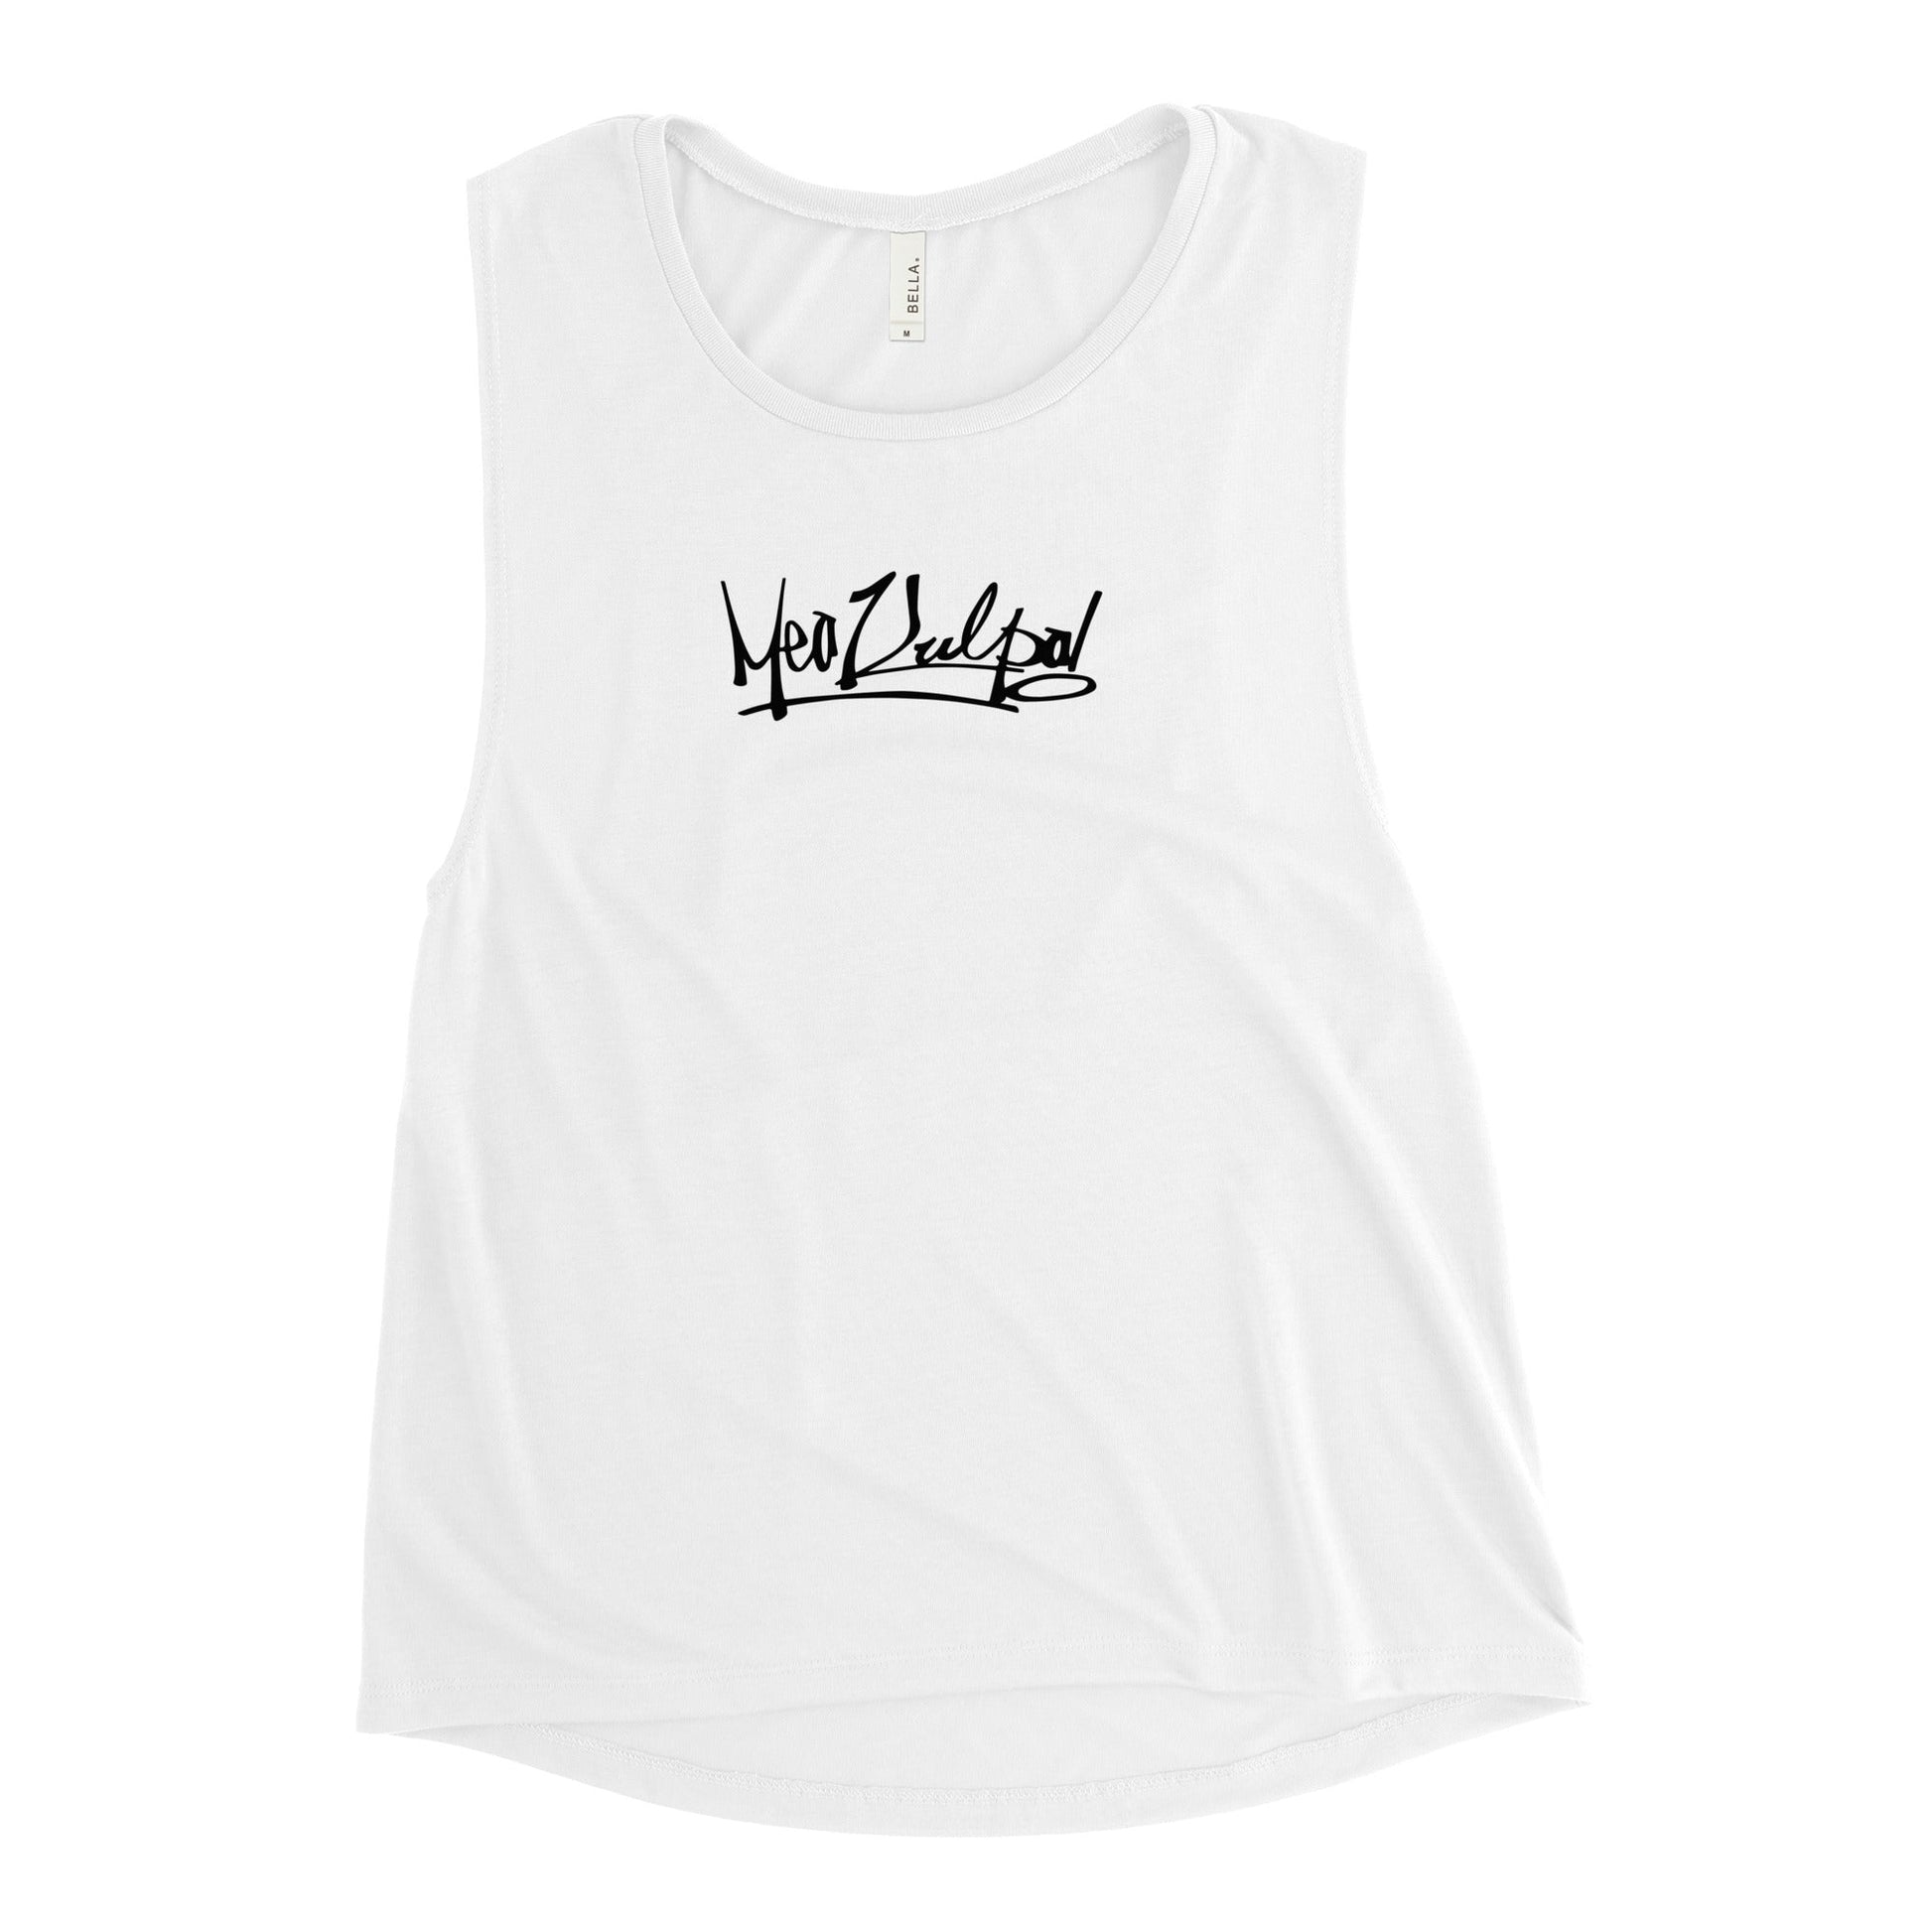 Embrace a laid-back yet stylish vibe with the MeaKulpa OG Logo Muscle Tank. The iconic MeaKulpa OG logo takes center stage on this soft and flowy tank, offering a relaxed fit with low-cut armholes and a curved bottom hem. Elevate your casual look with this urban-chic essential, where comfort meets bold MeaKulpa flair.